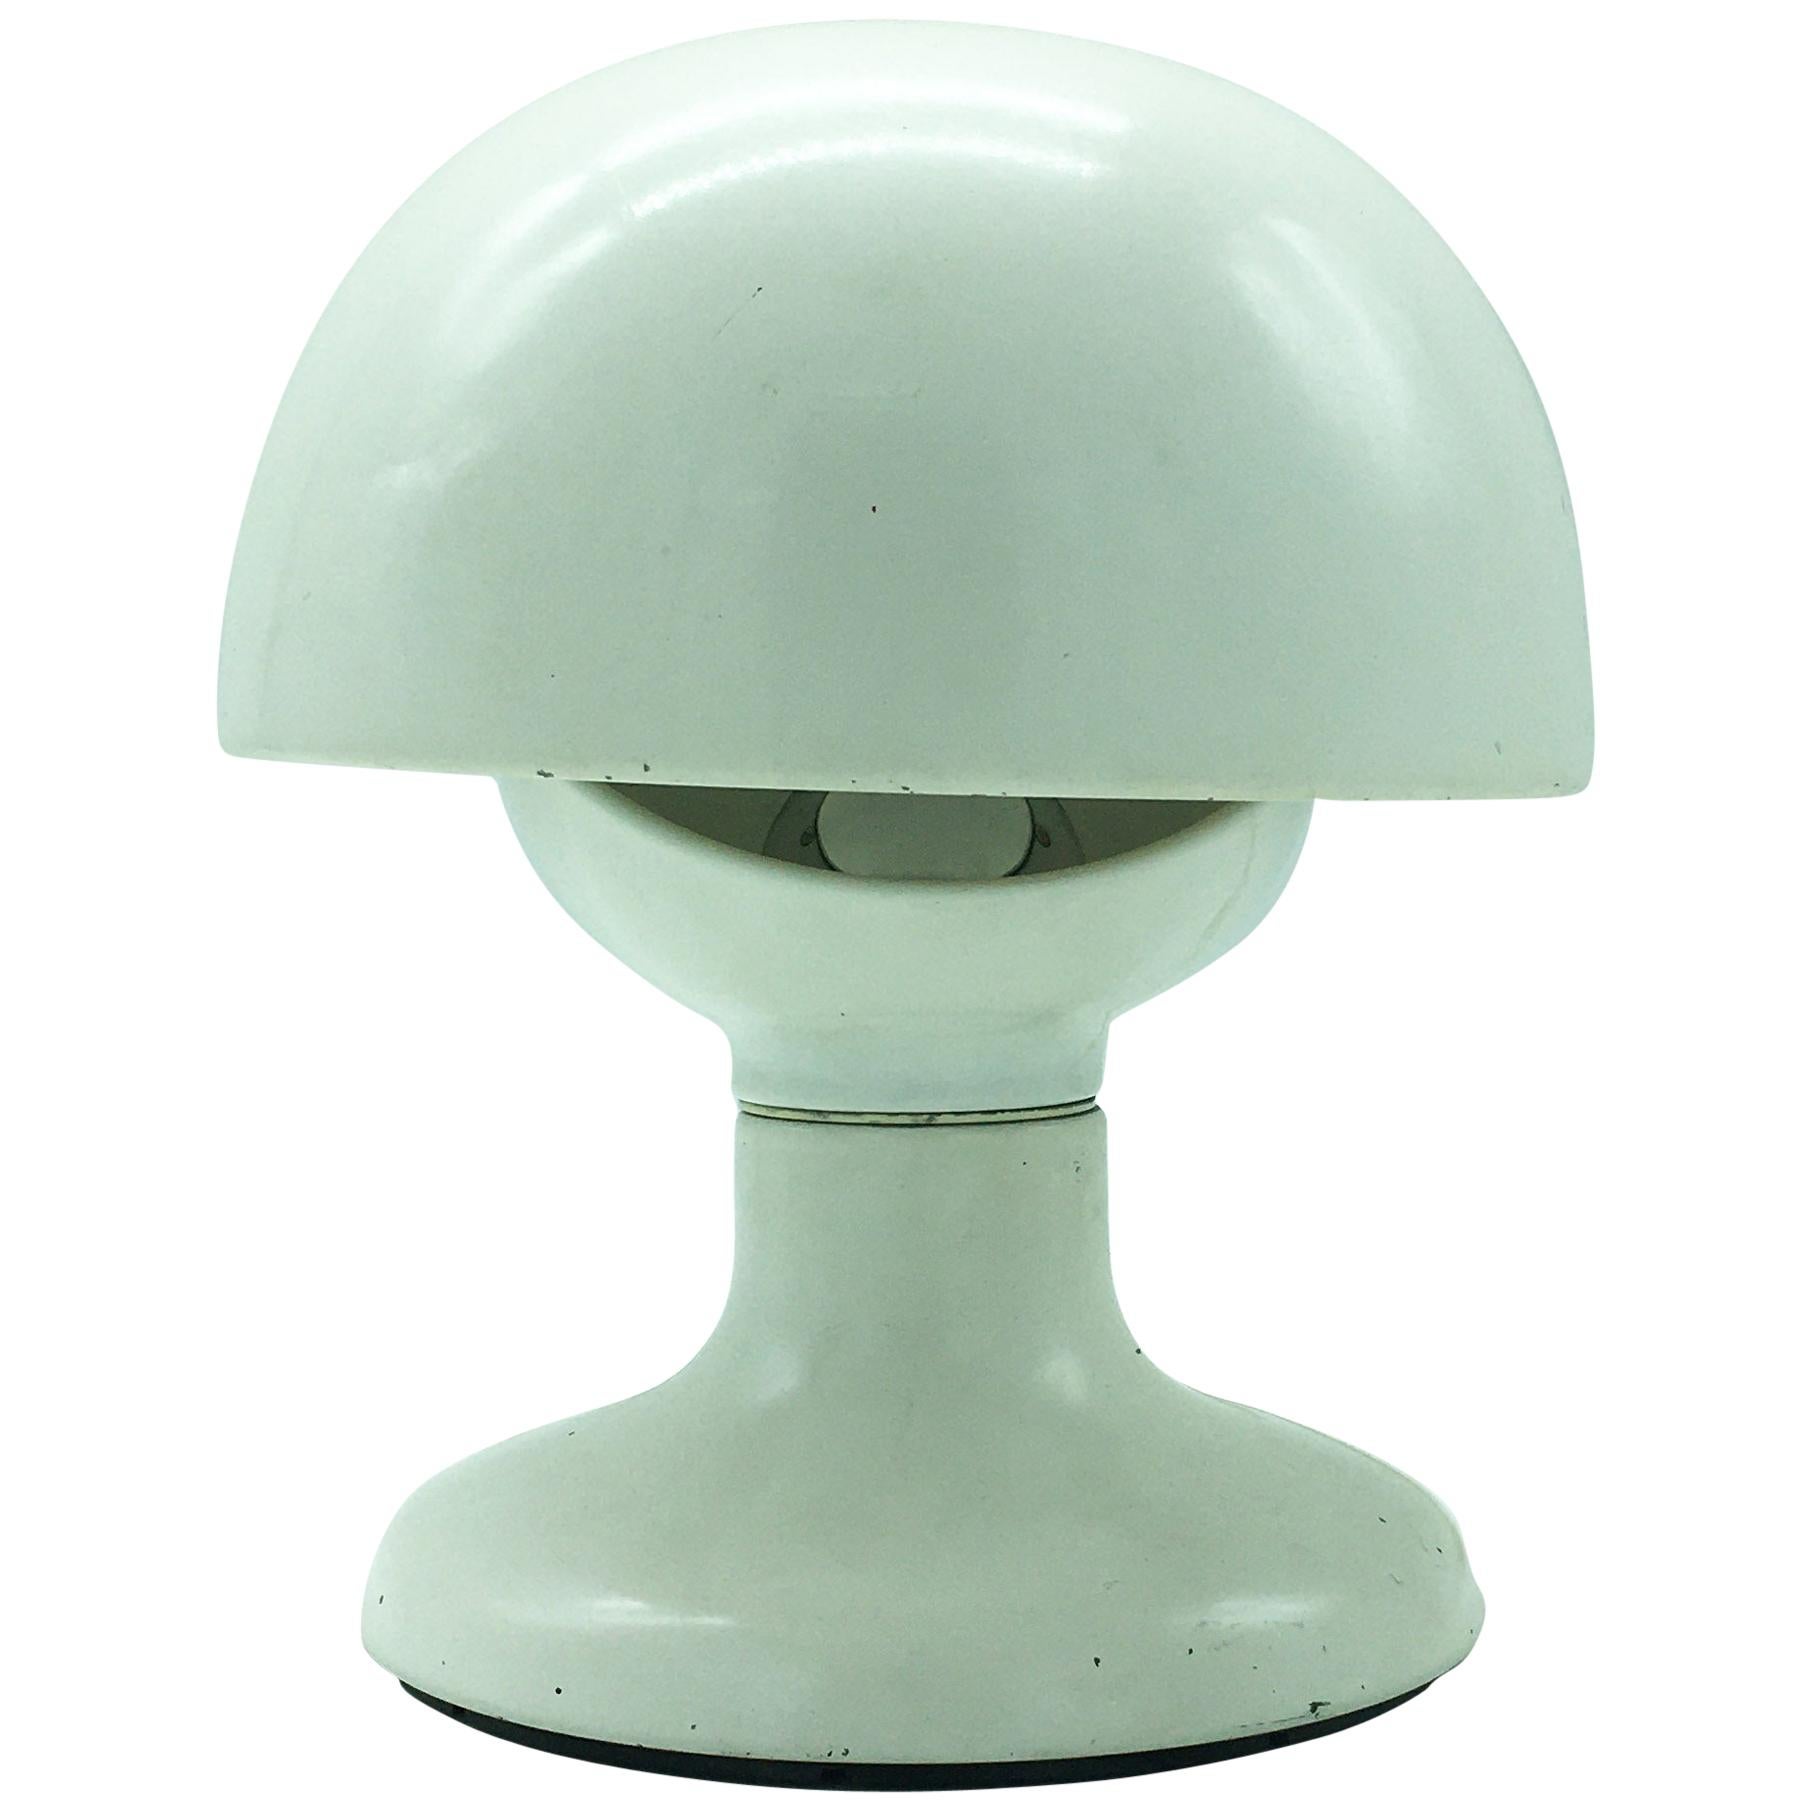 Afra & Tobia Scarpa for Flos "Jucker" White Metal Table Lamp, Italy, 1963